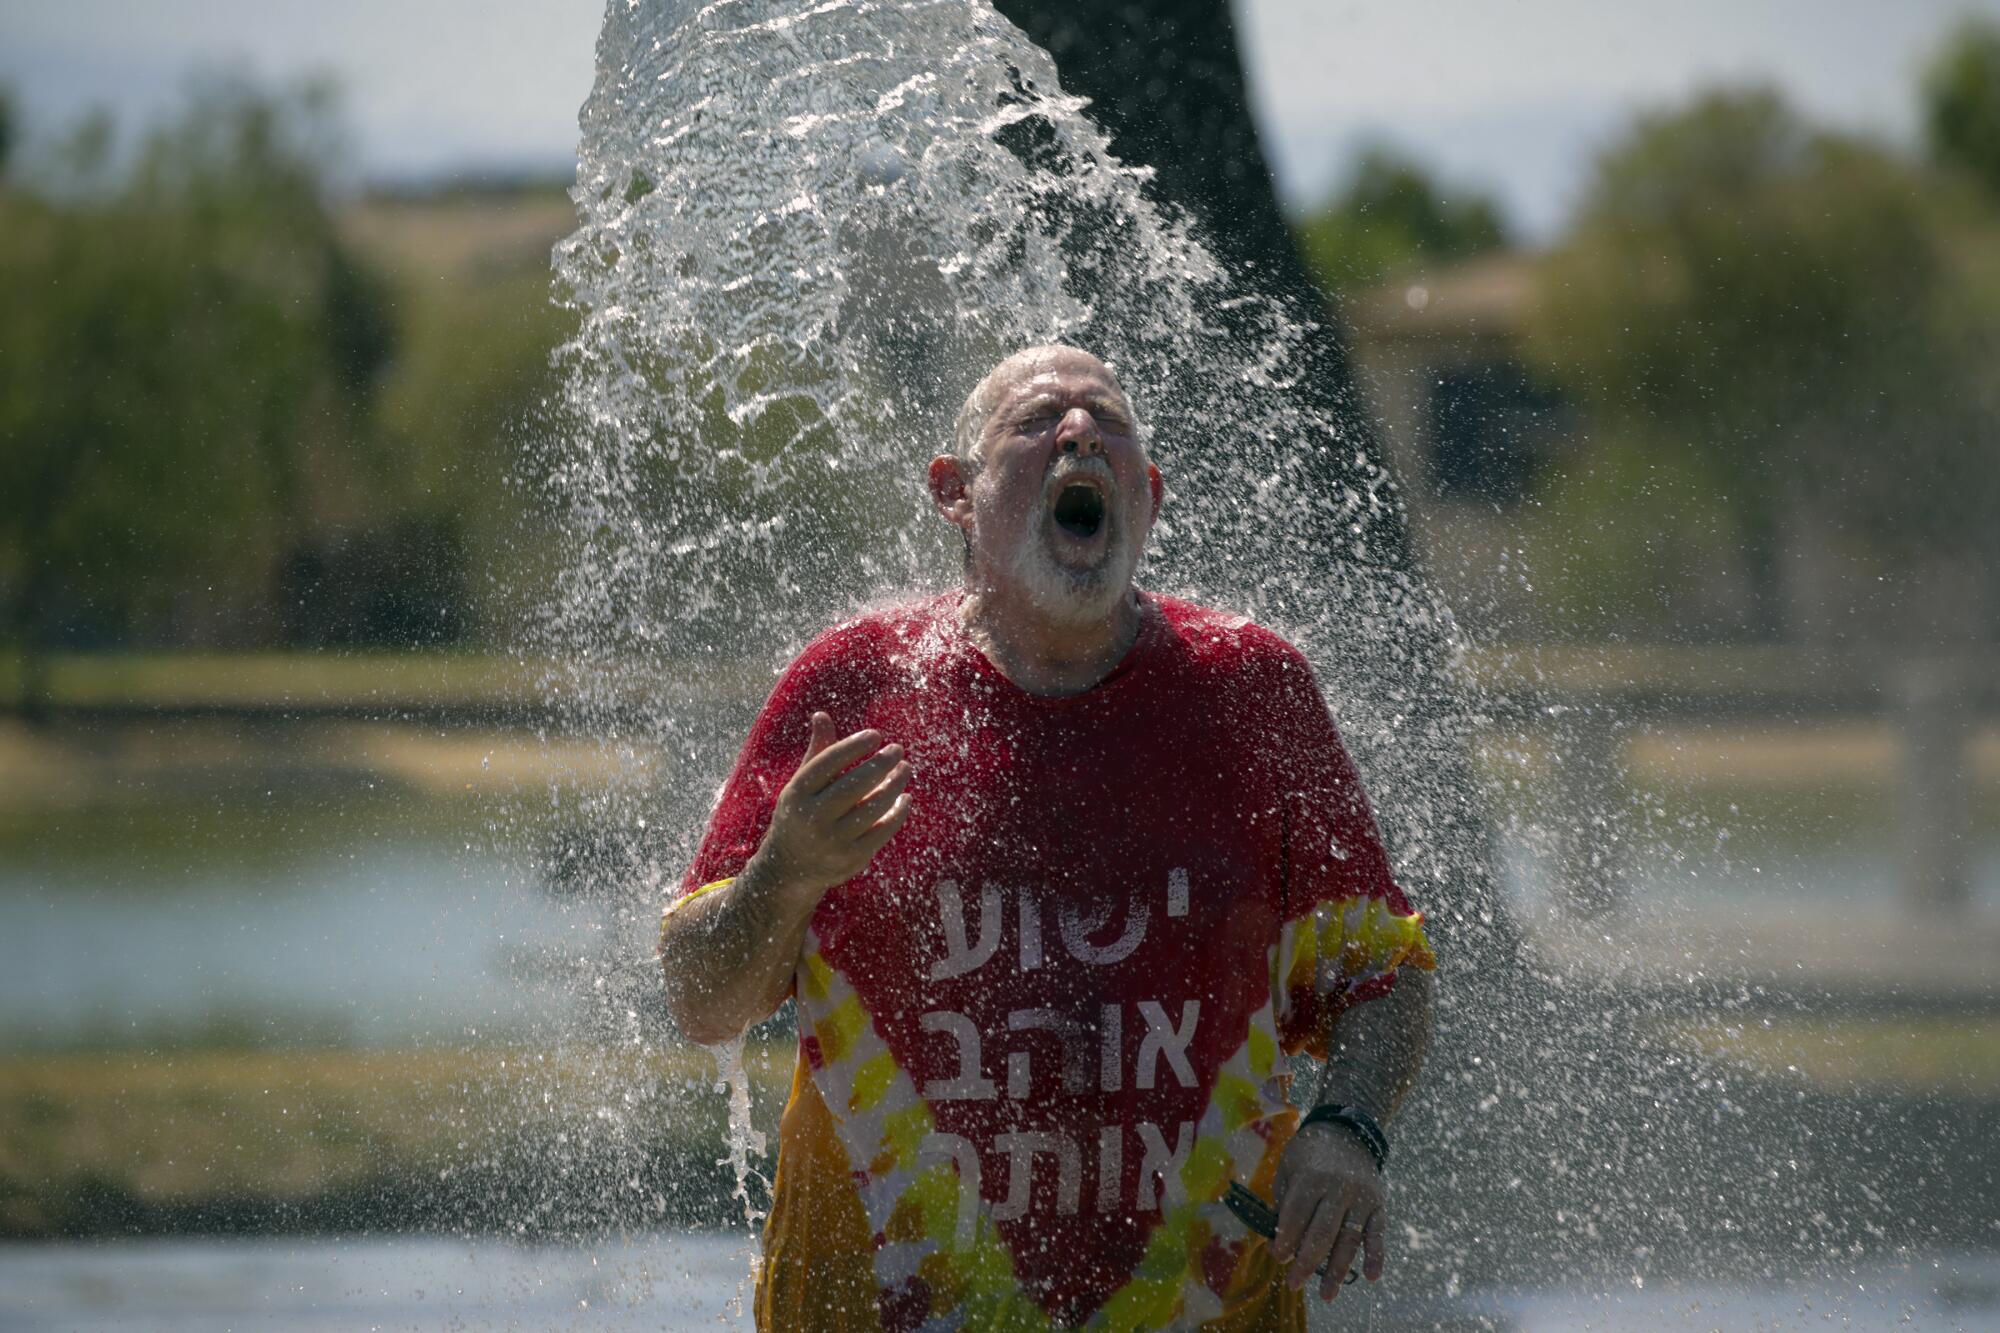 Man reacts as water from a sprinkler hits him